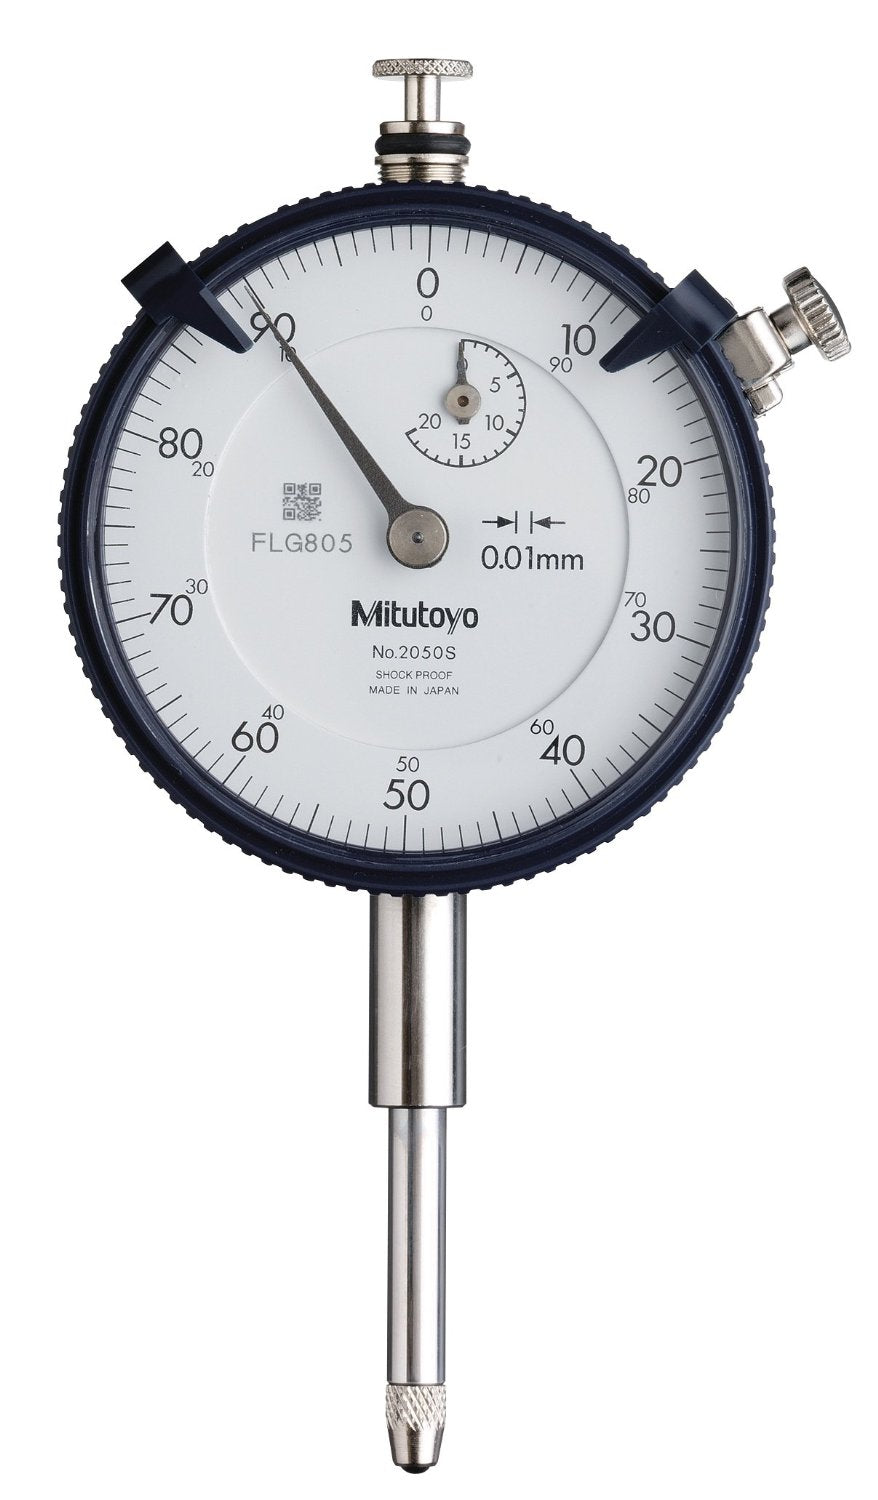 Mitutoyo 2050S Dial Indicator 0-20*0.01mm Brand New